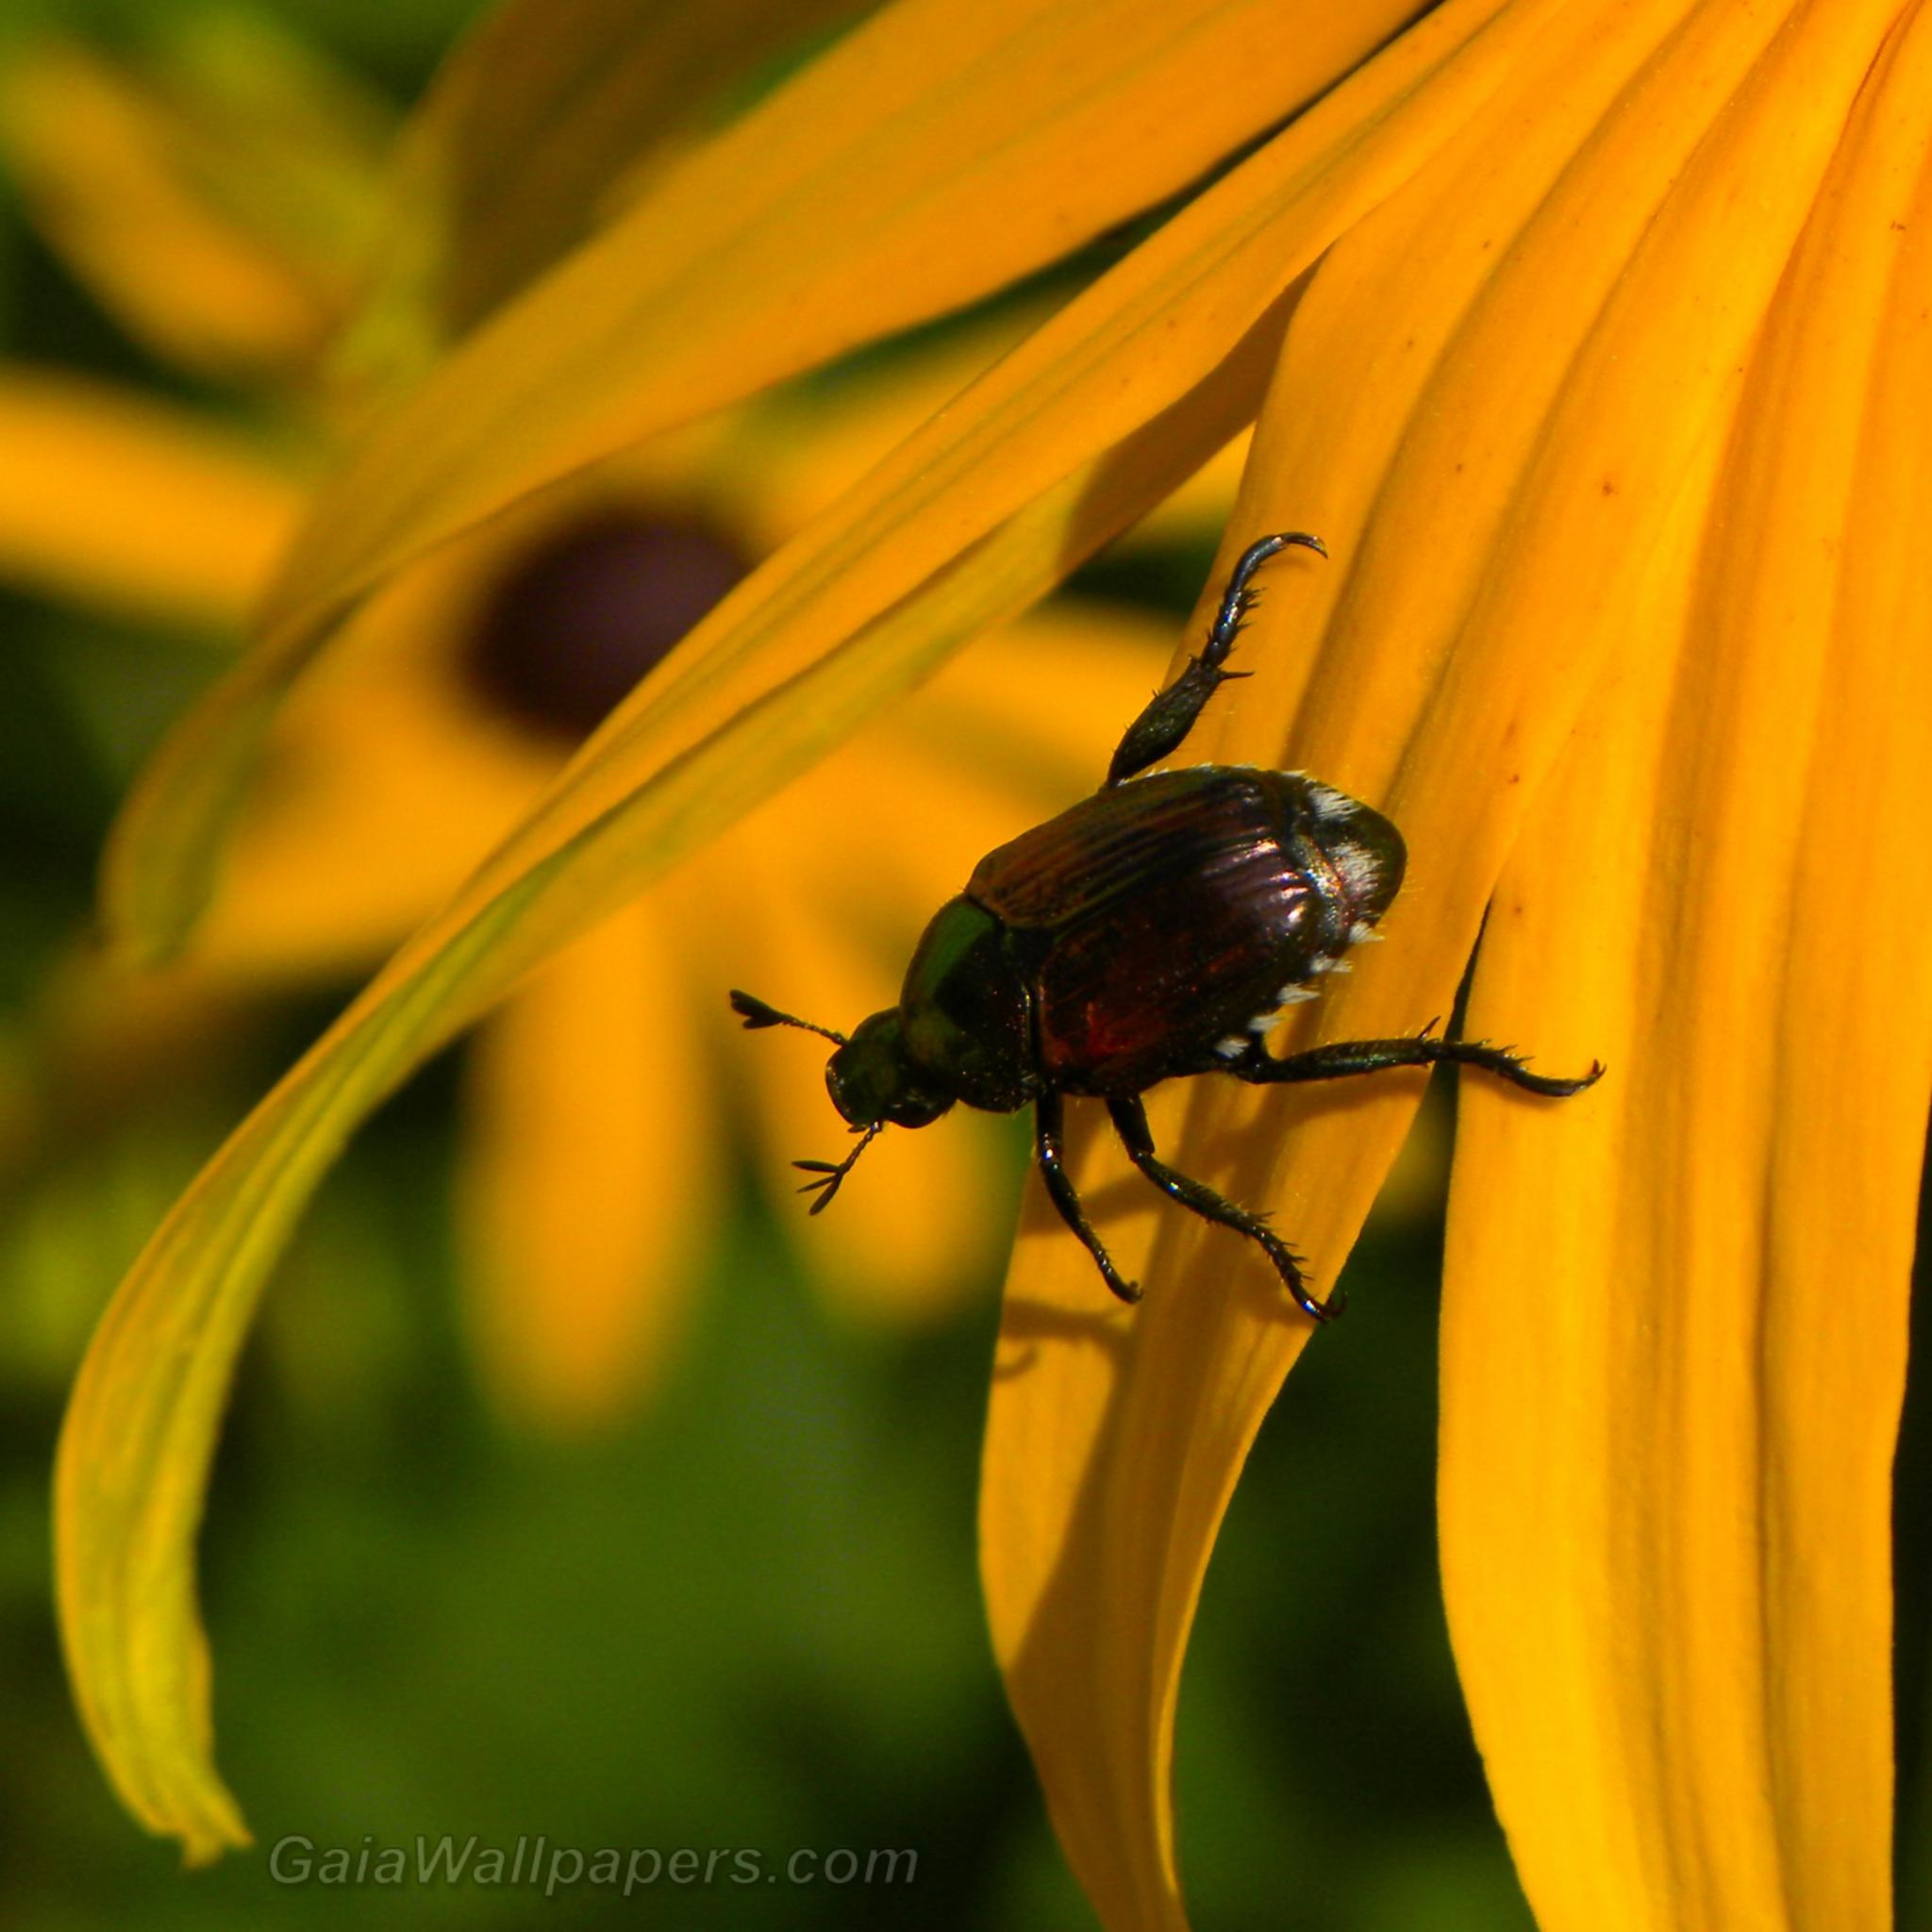 Small insect climbing a Rudbeckia - Free desktop wallpapers